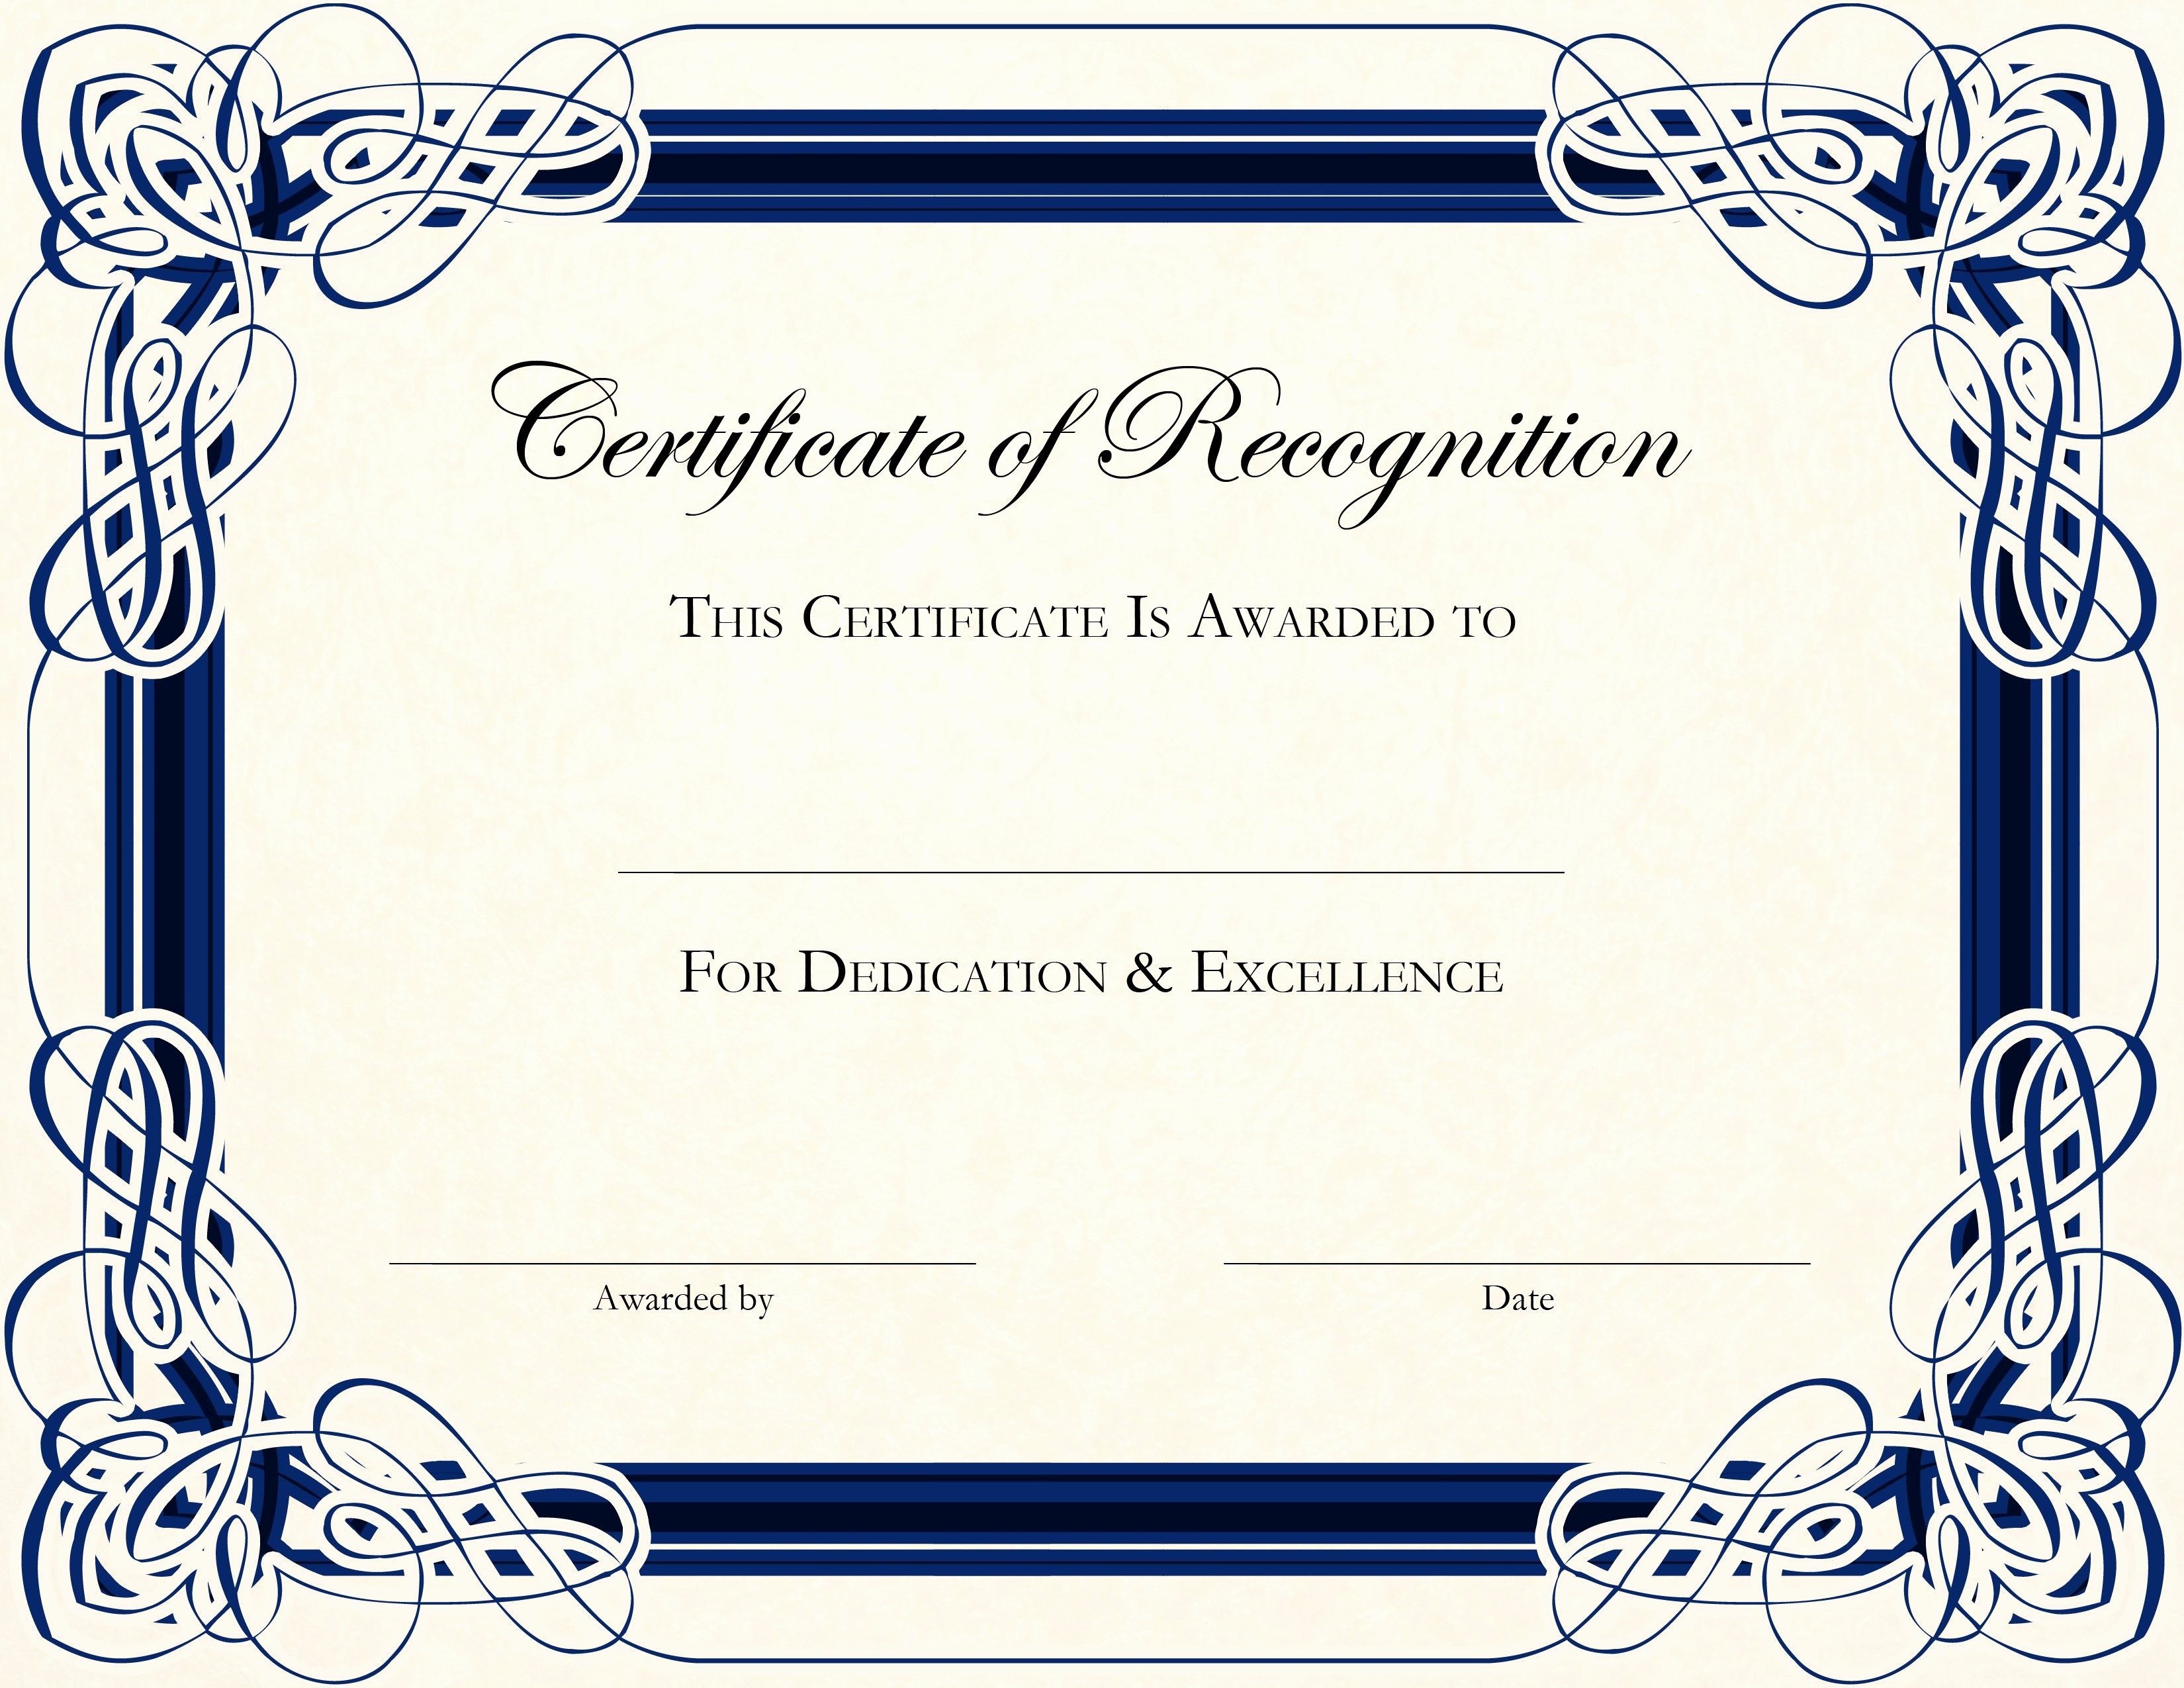 Award Certificate Template Free New Free Printable Certificate Templates for Teachers